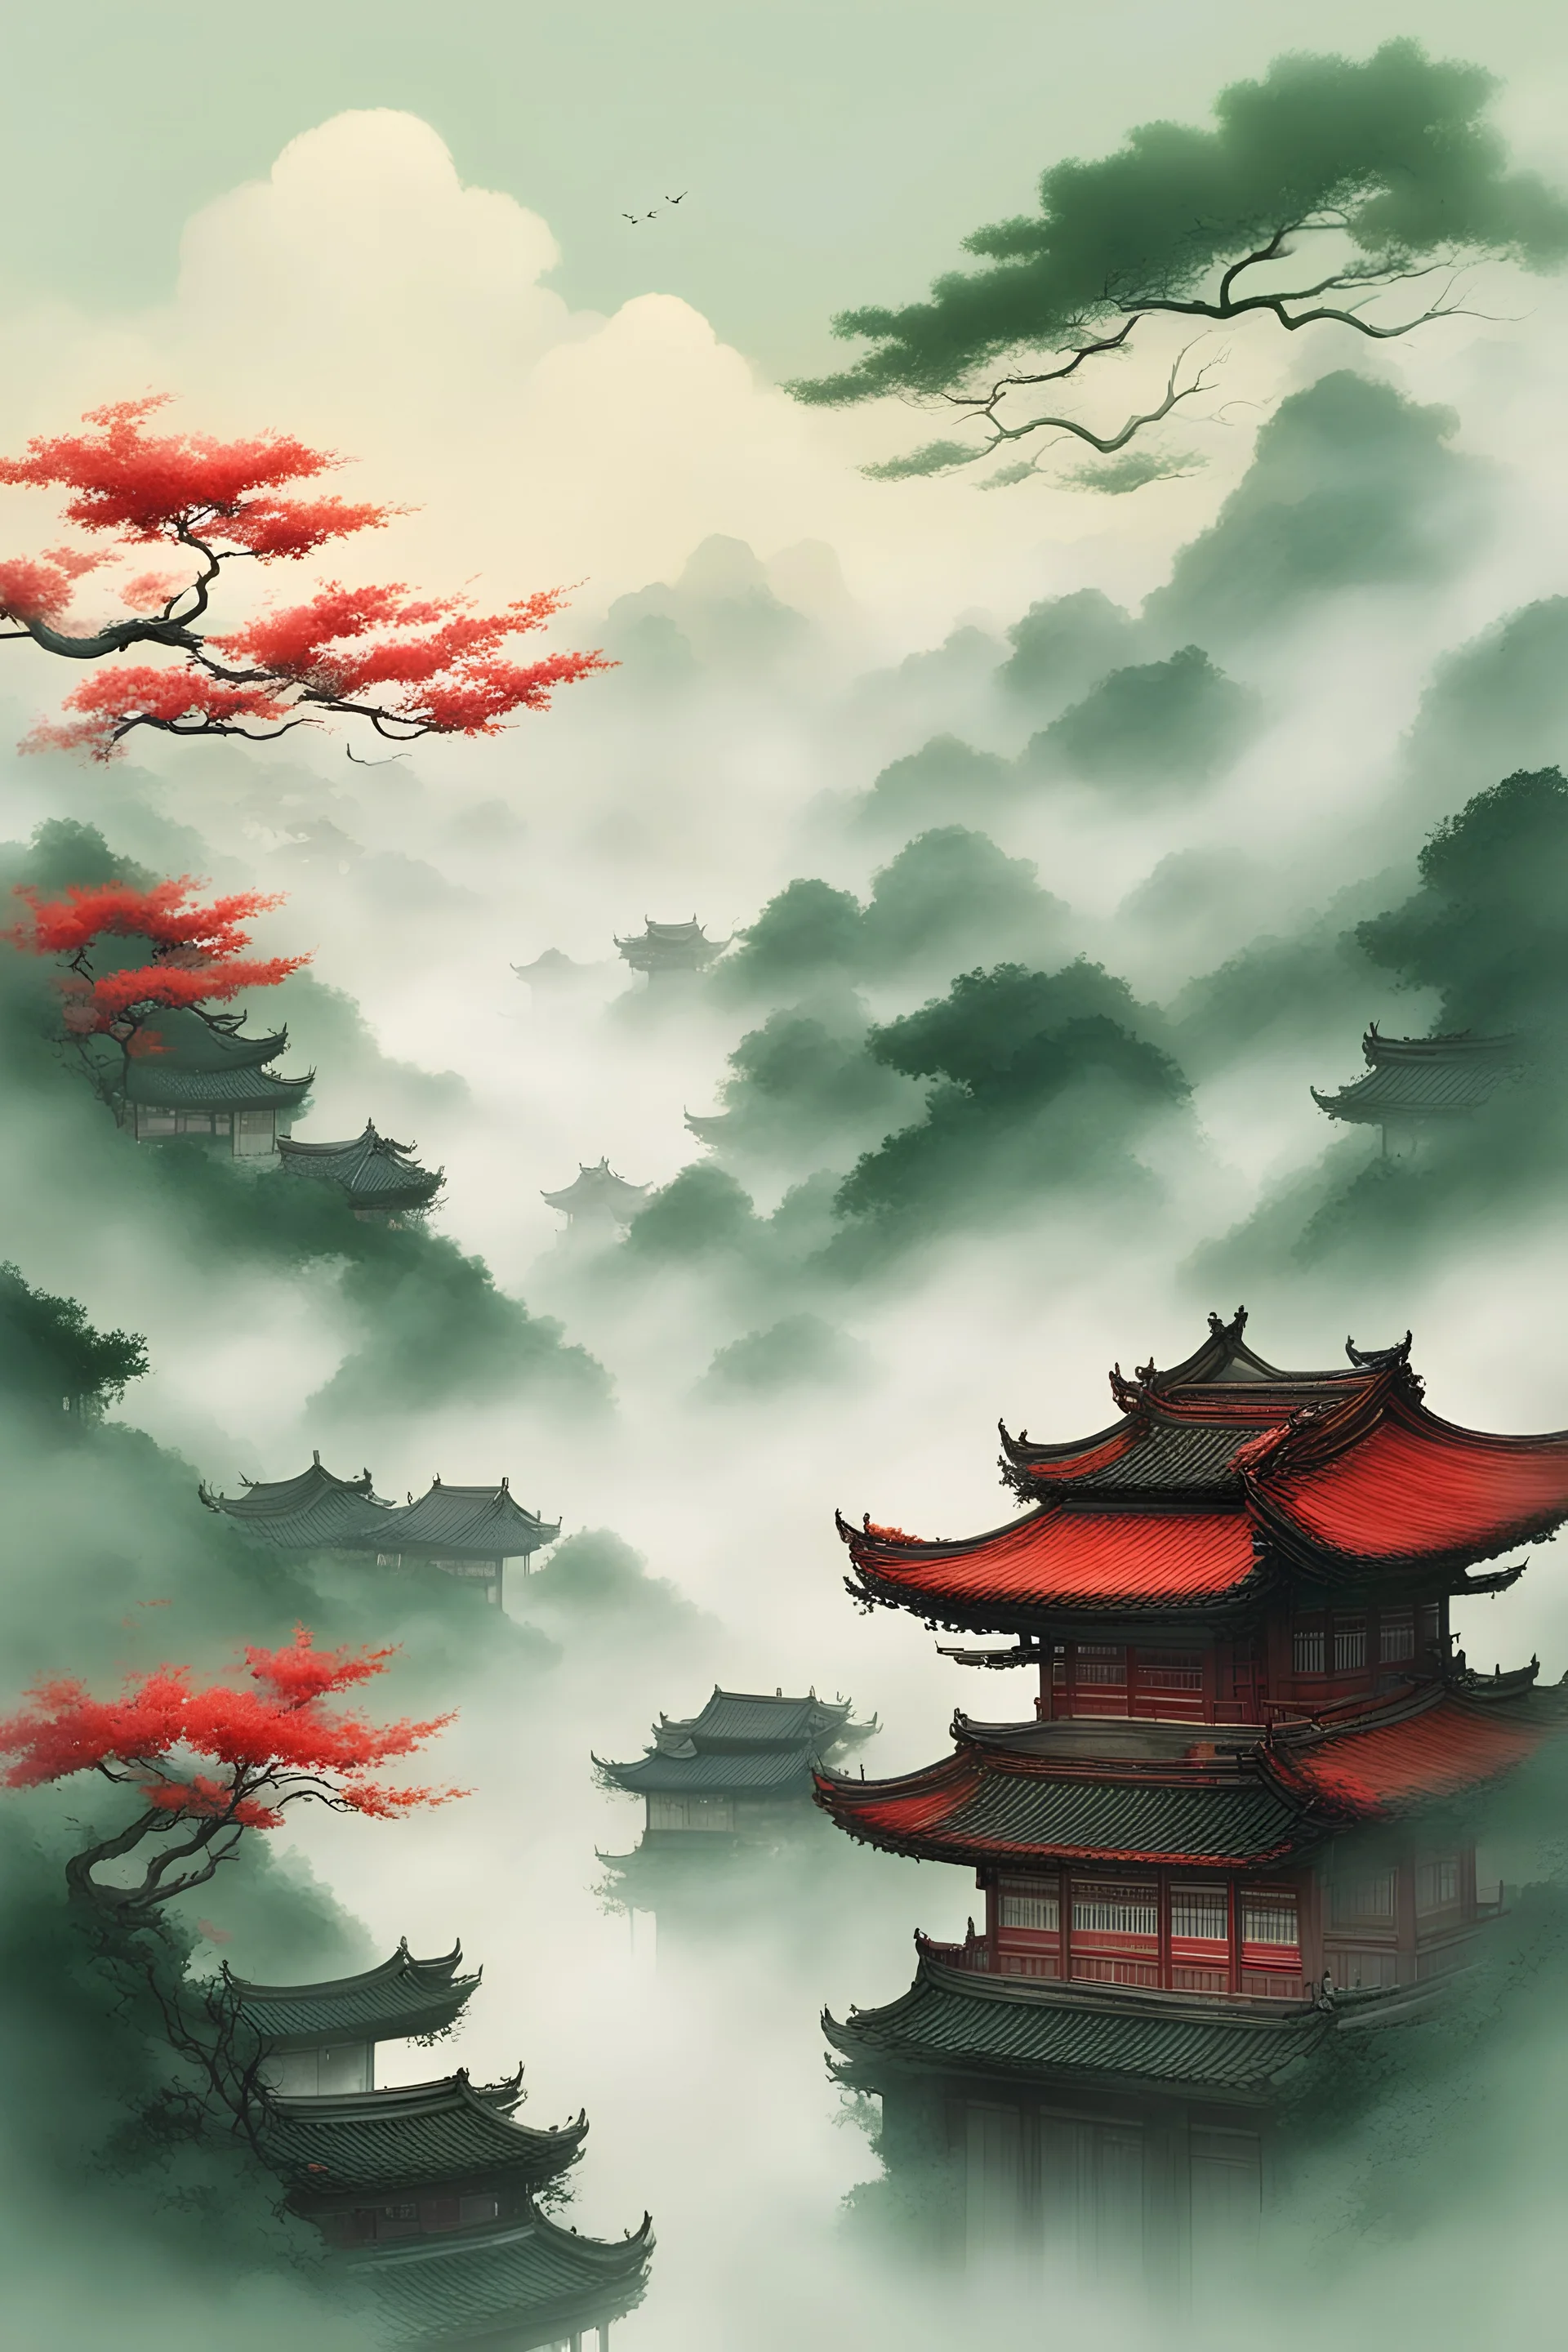 Jiangnan, green wind, clouds and mist, a little yellow-green and tender red, ancient style, poetry and illustrations, very clear and delicate